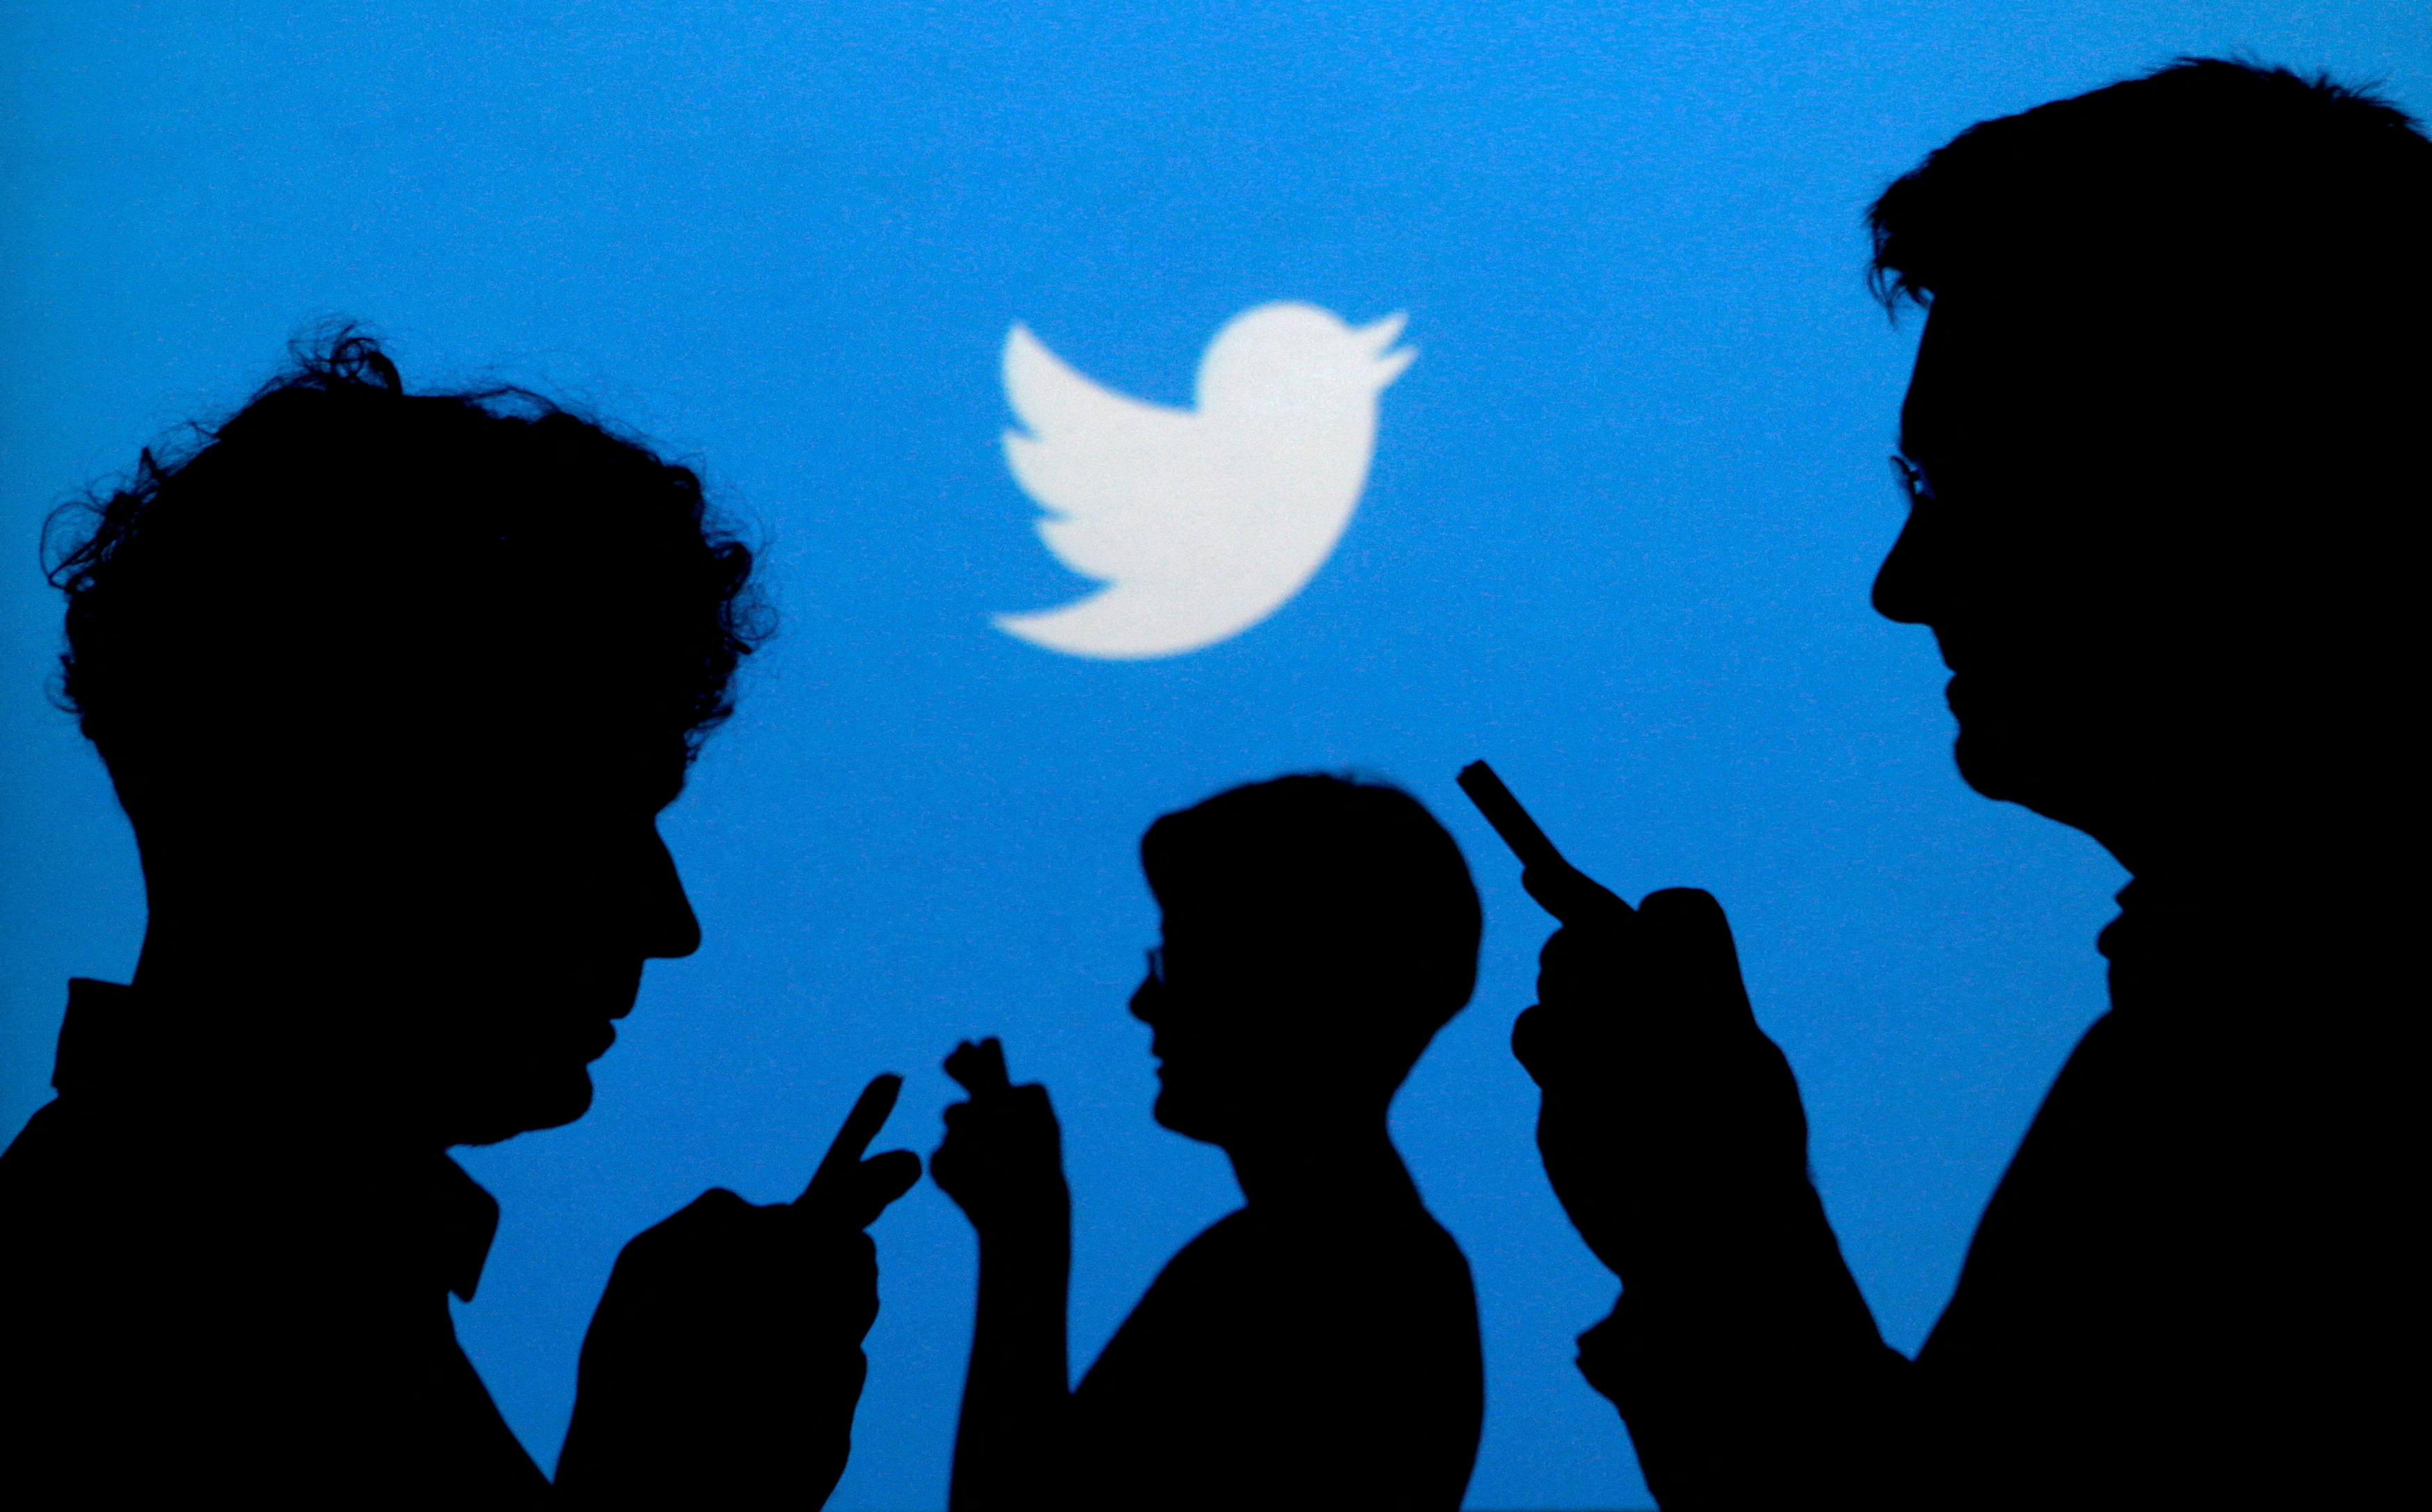 File photo: Silhouettes of people holding mobile phones against a backdrop of the Twitter logo.